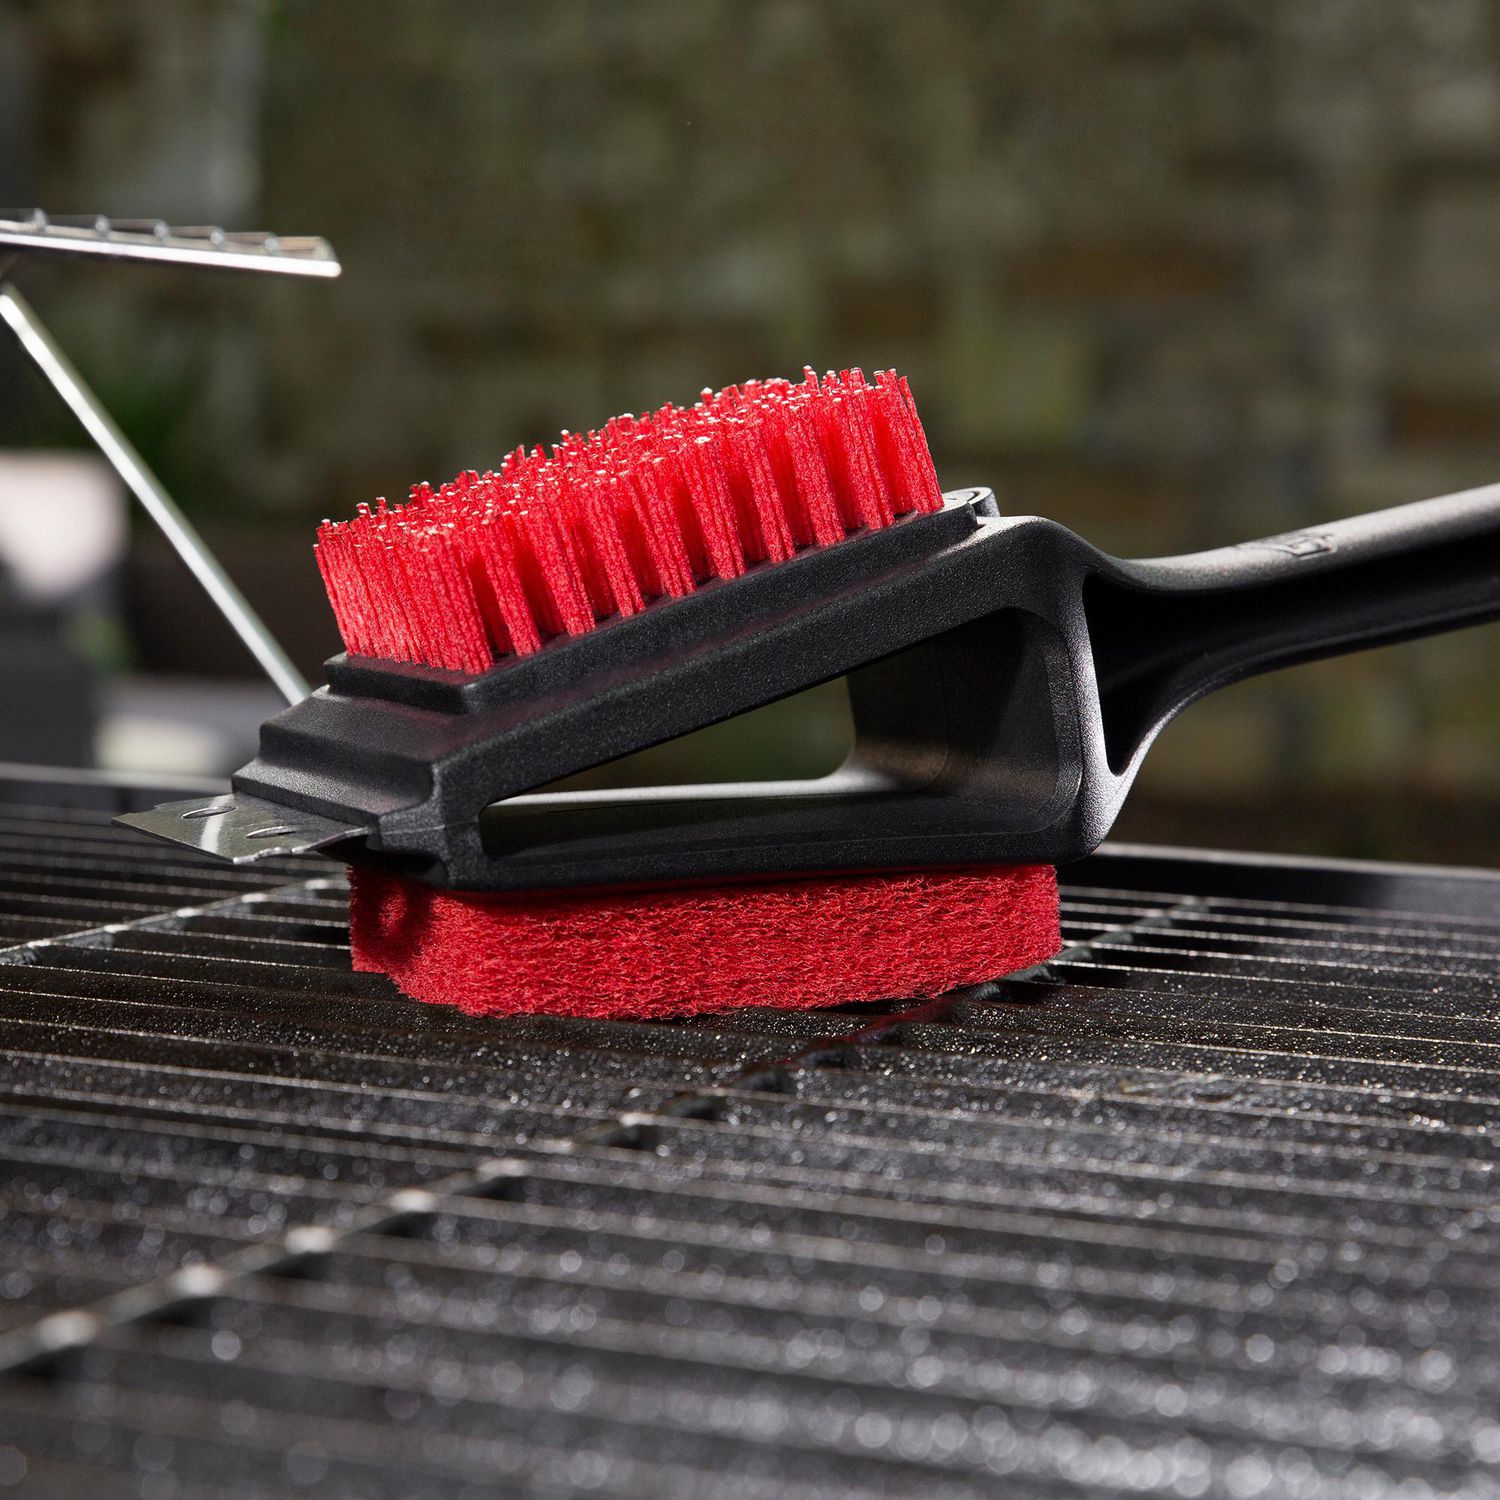 Expert Grill Soft Grip 3-in-1 Barbecue Cleaning Brush